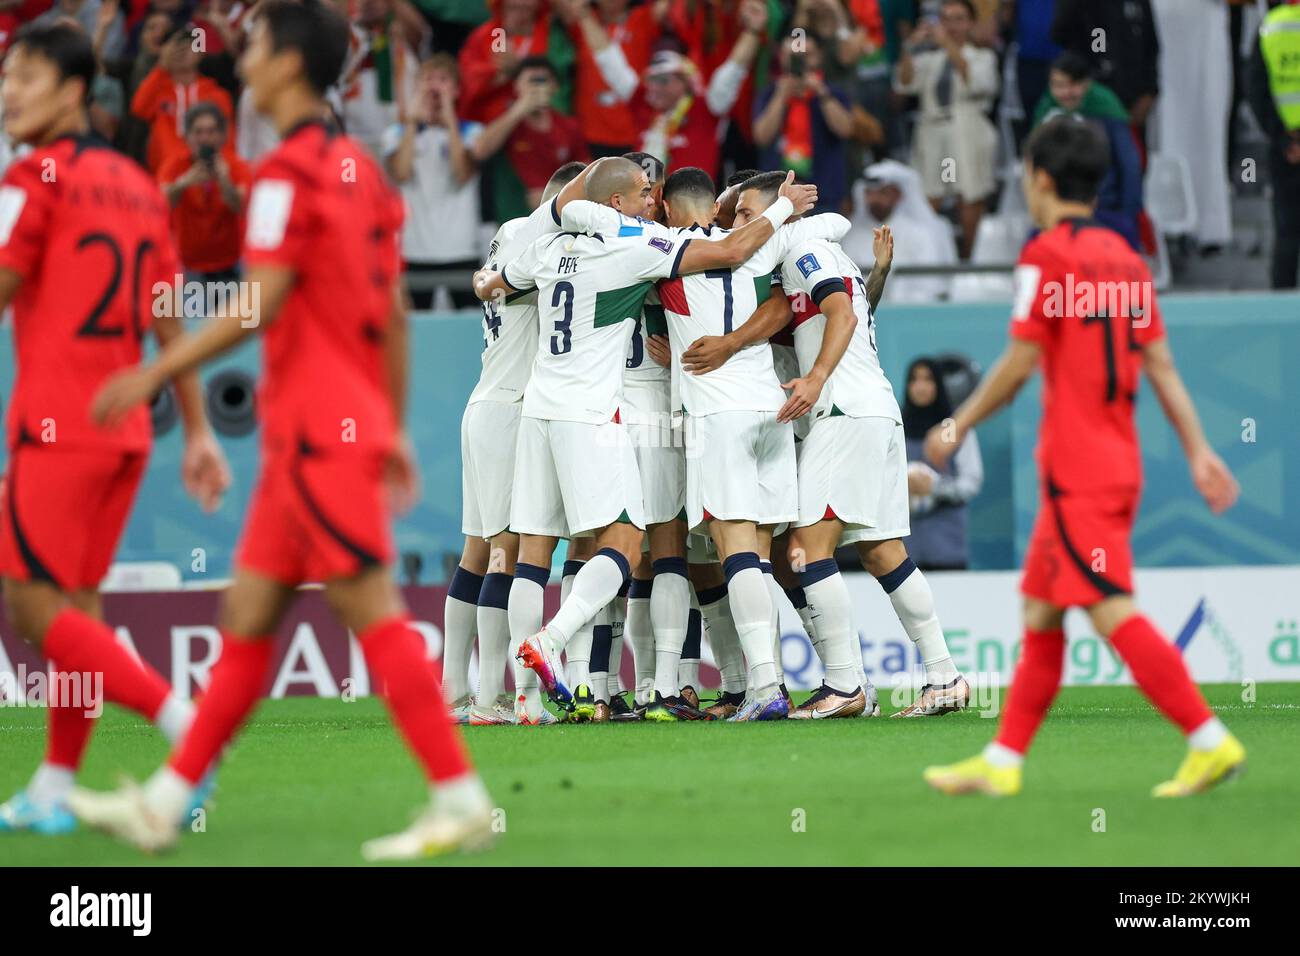 Doha, Qatar. 02nd Dec, 2022. Portugal national team players celebrate Ricardo Horta's goal during a match against South Korea in Group H of the FIFA World Cup Qatar 2022 between South Korea and Portugal at the Stadium Education City in Doha, Qatar. December 2. Credit: Brazil Photo Press/Alamy Live News Stock Photo